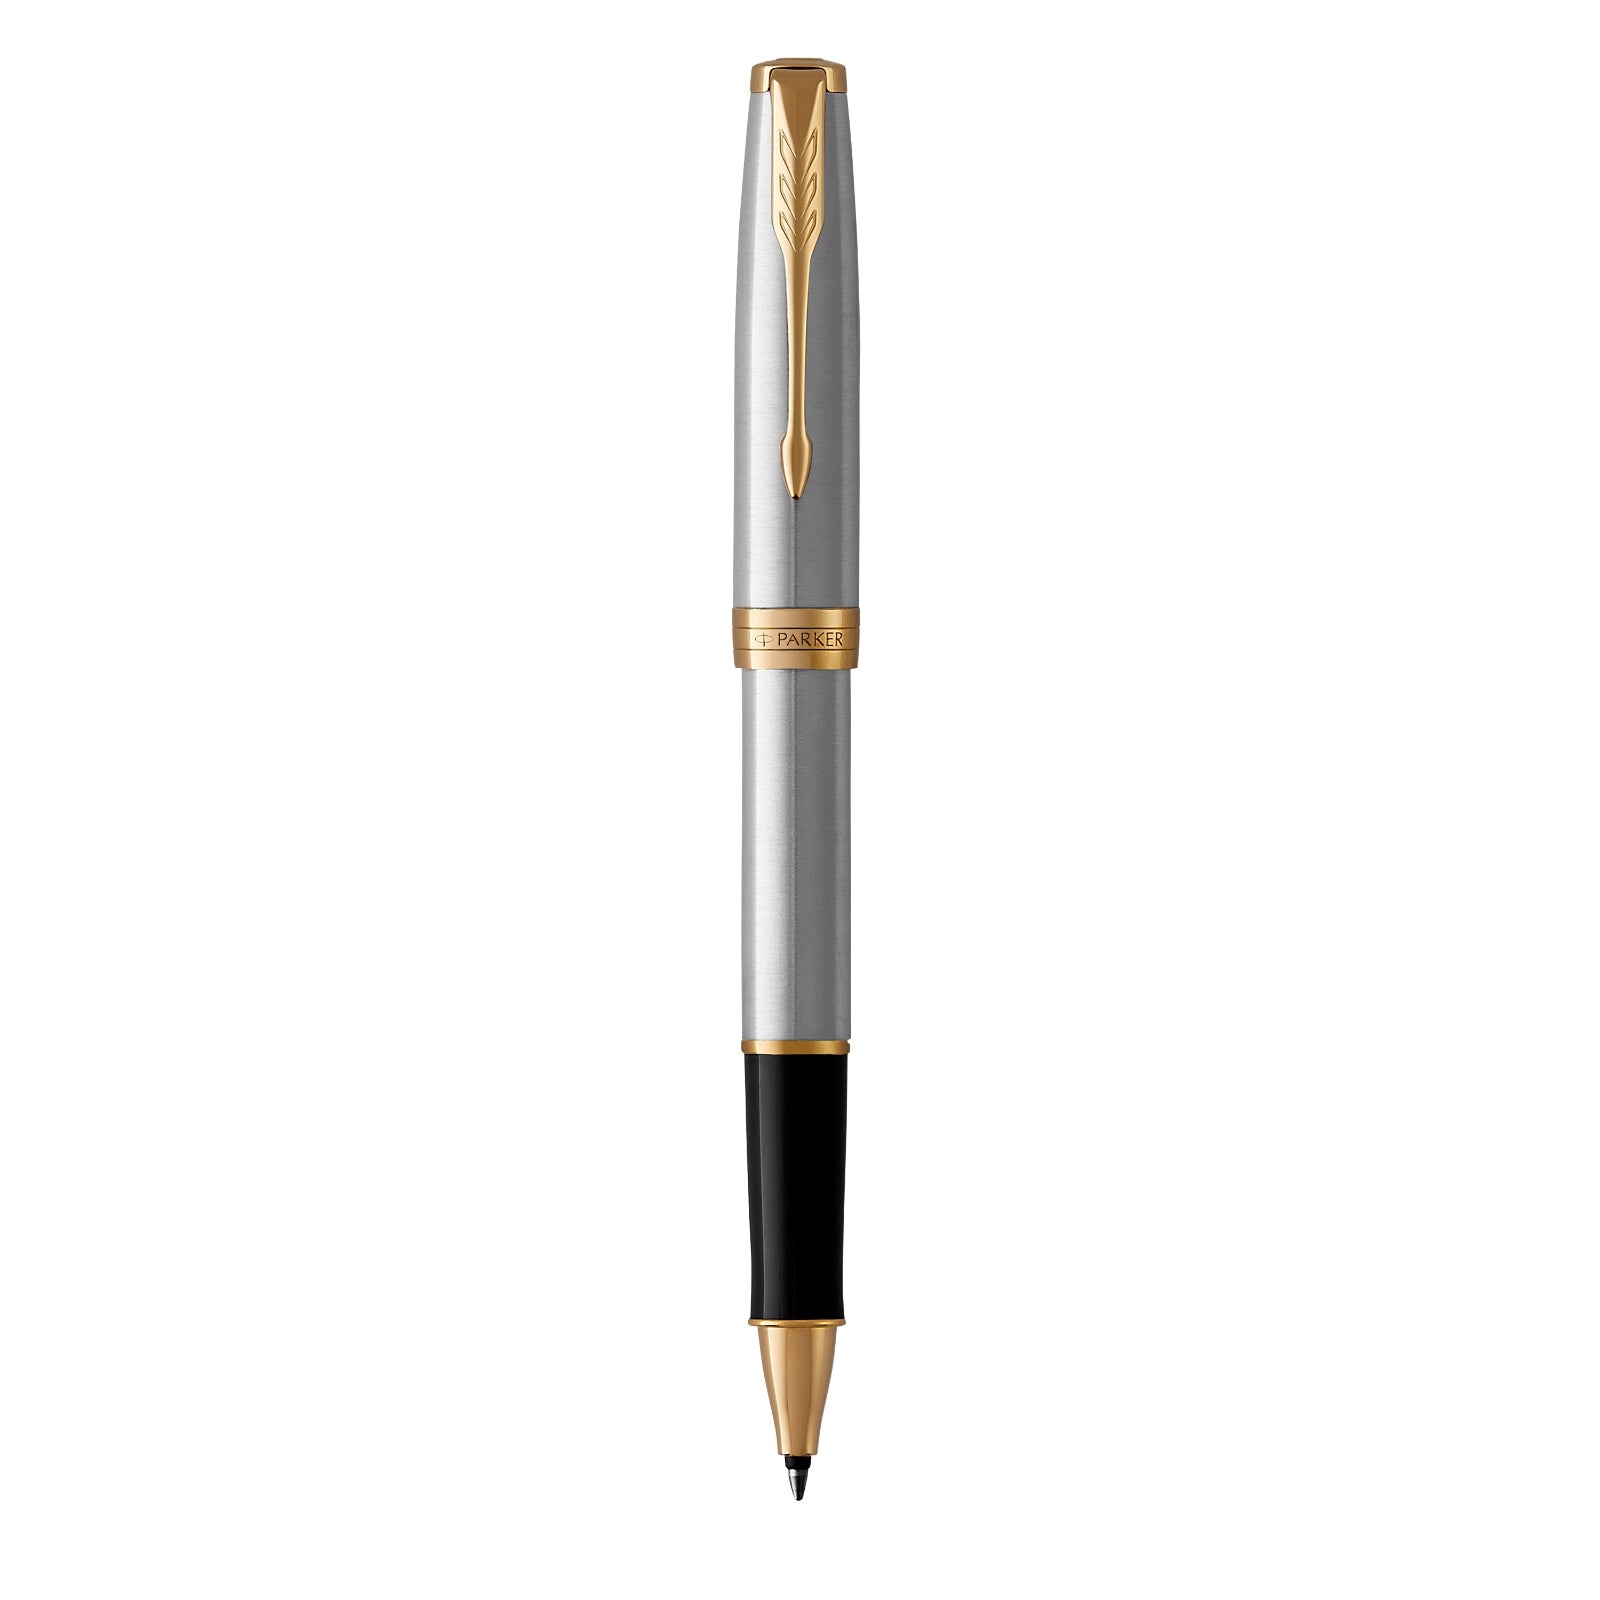 Parker Sonnet Stainless Steel Gold Trim Rollerball - Pencraft the boutique